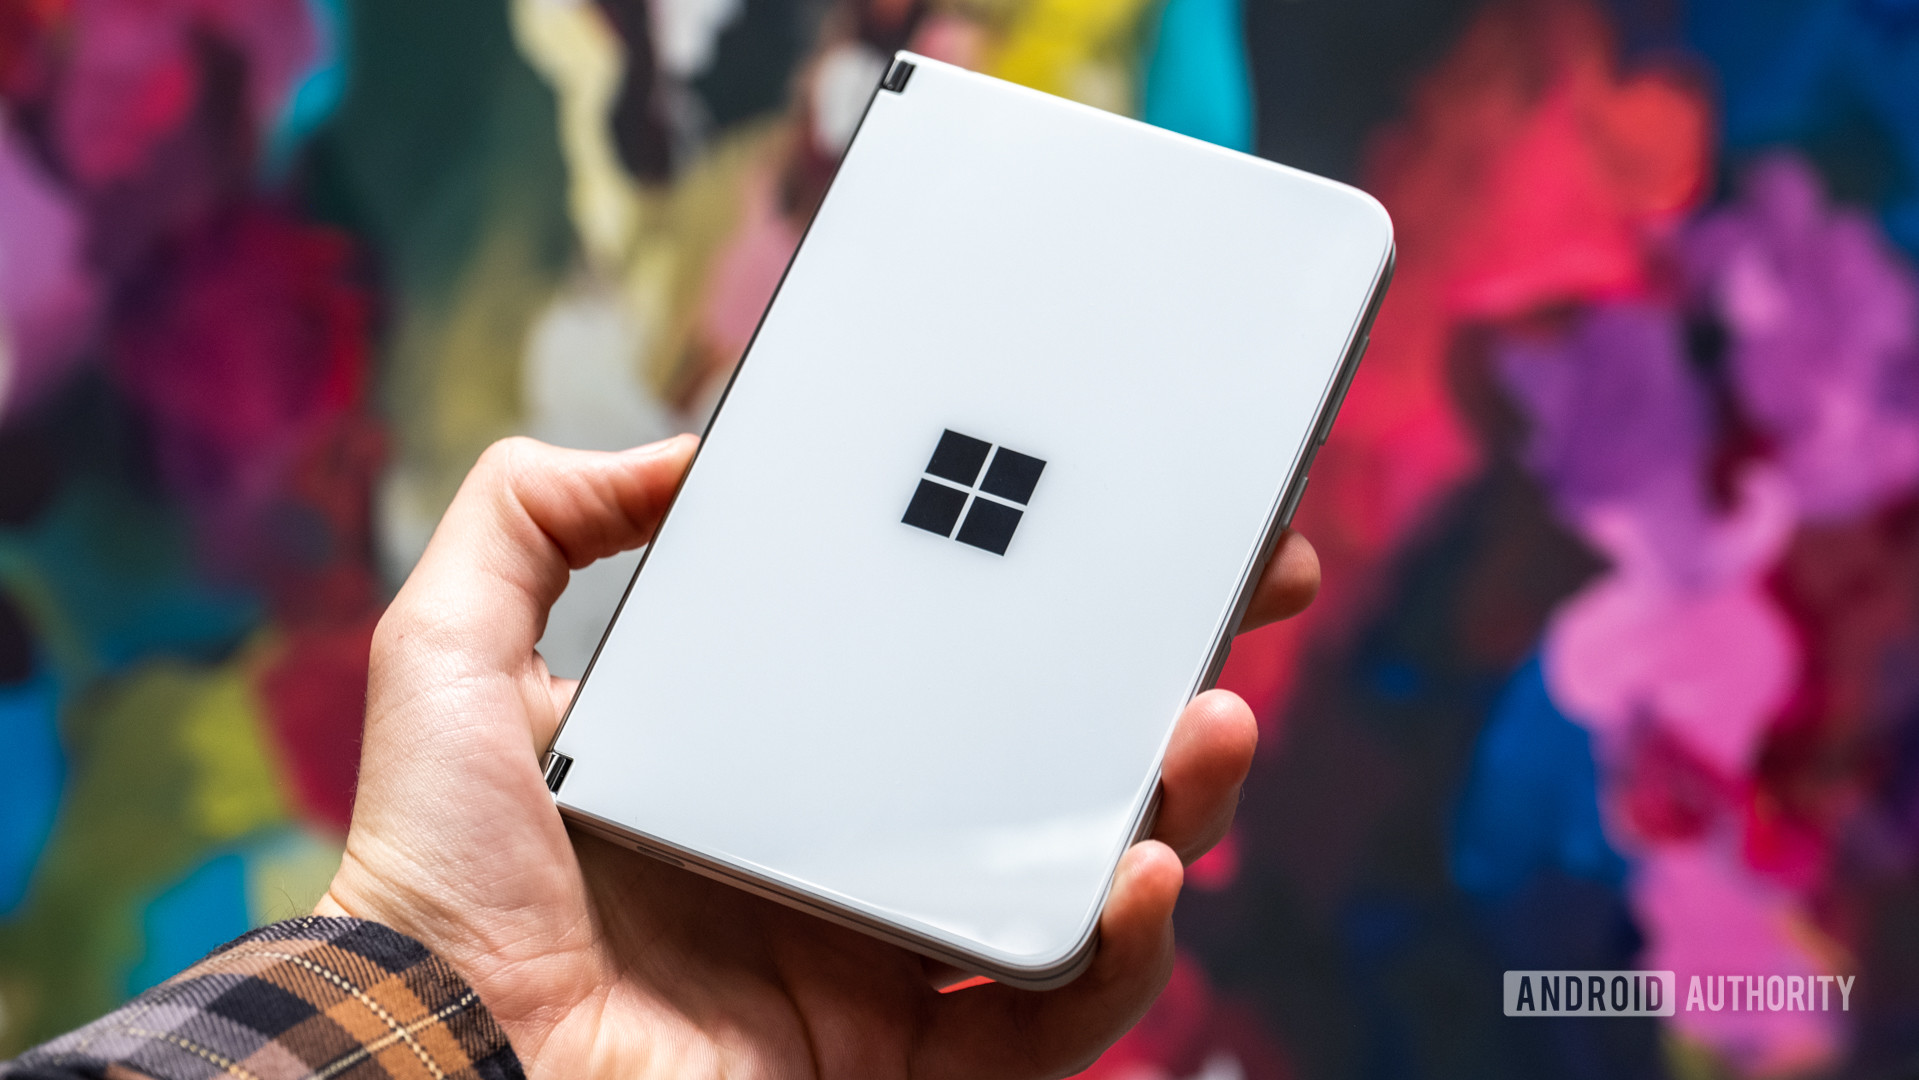 Microsoft Surface Duo closed in hand against backdrop